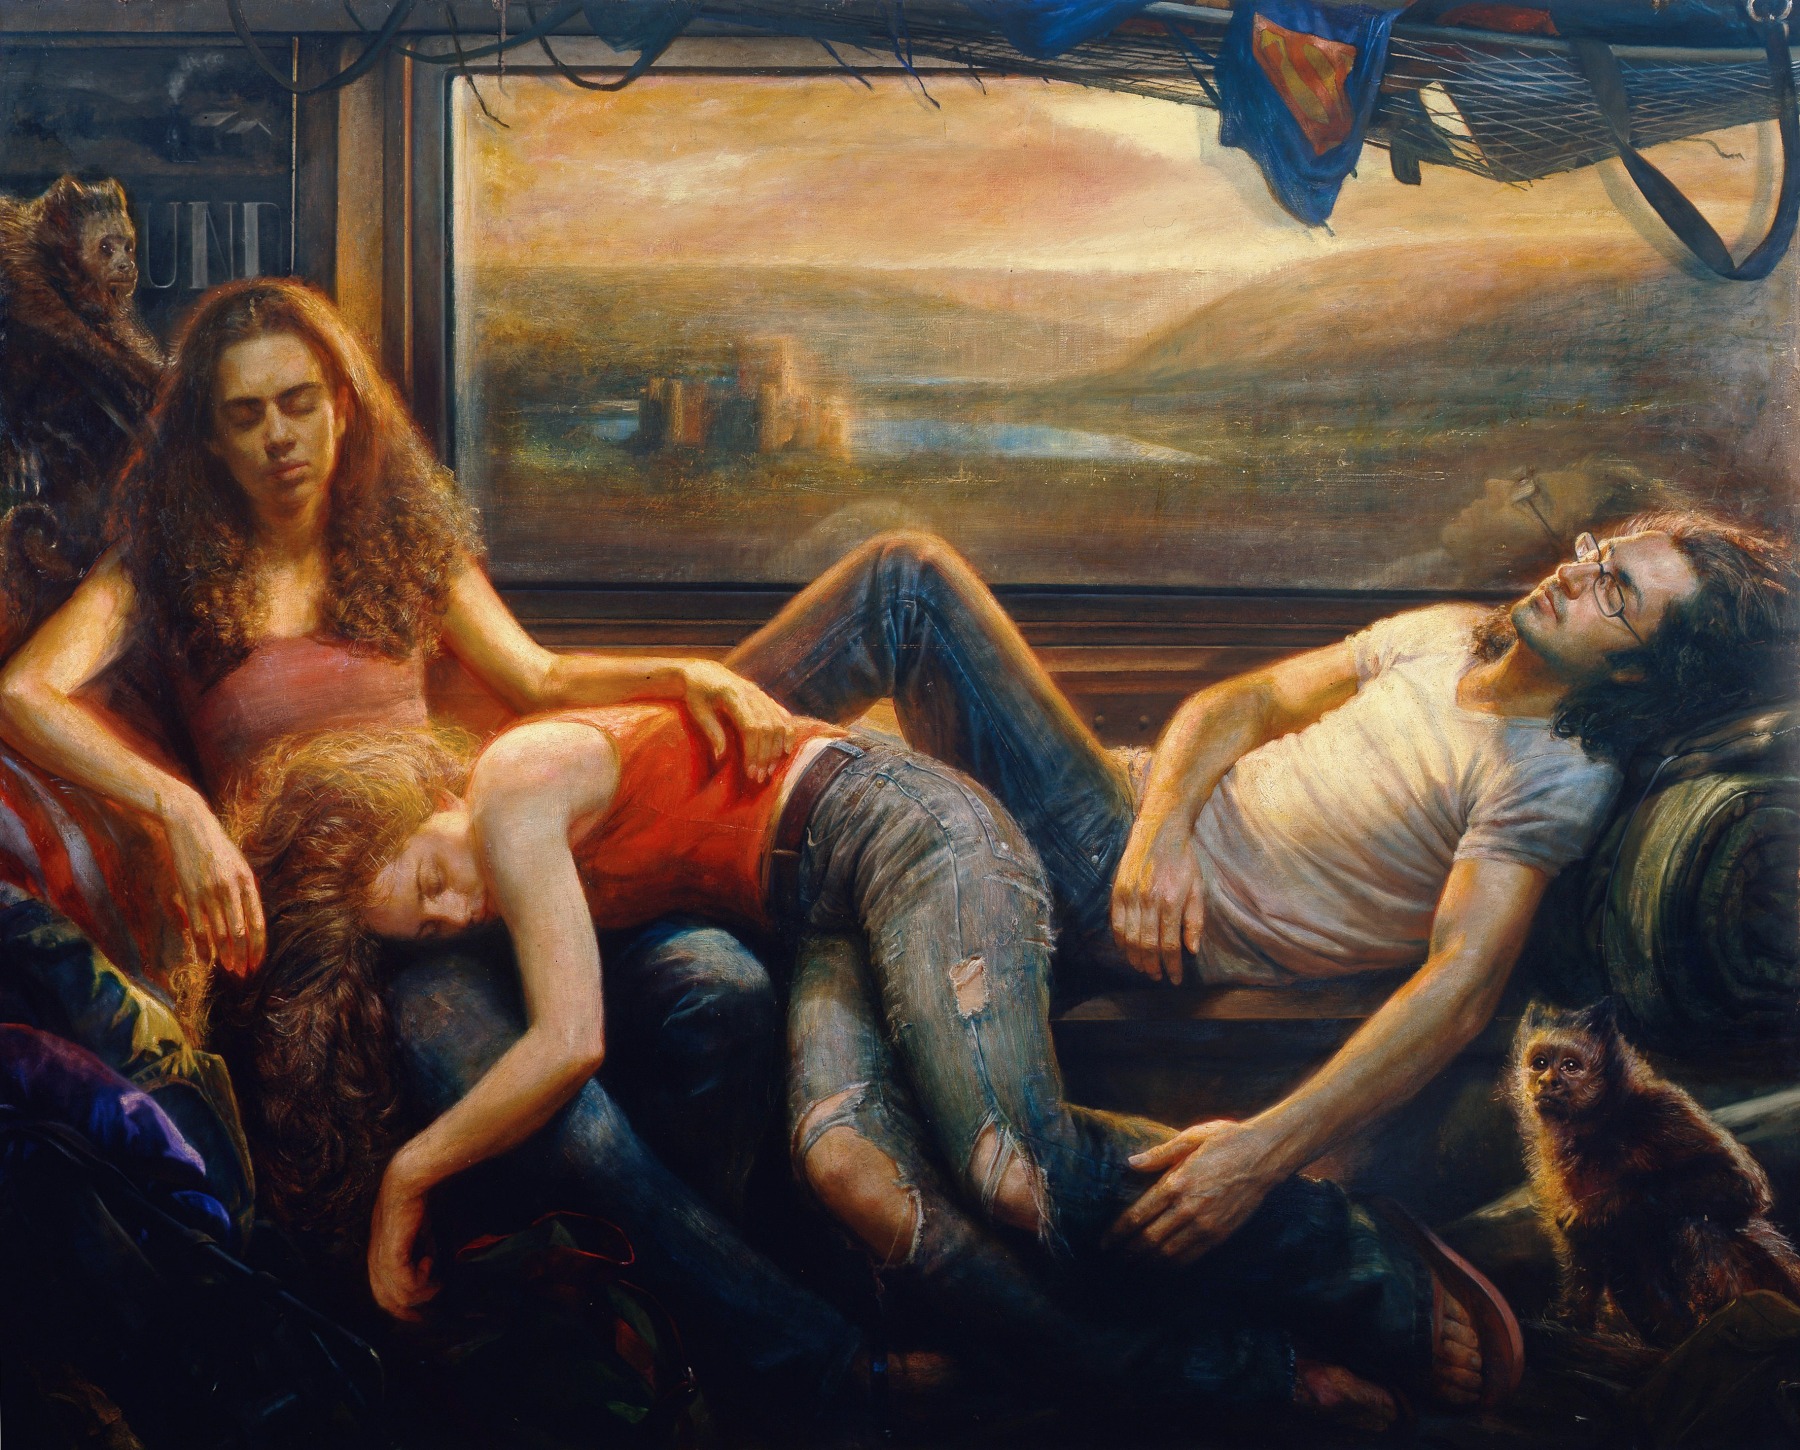 Steven Assael, Passengers (SOLD), 2008, oil on canvas, 72 x 90 inches